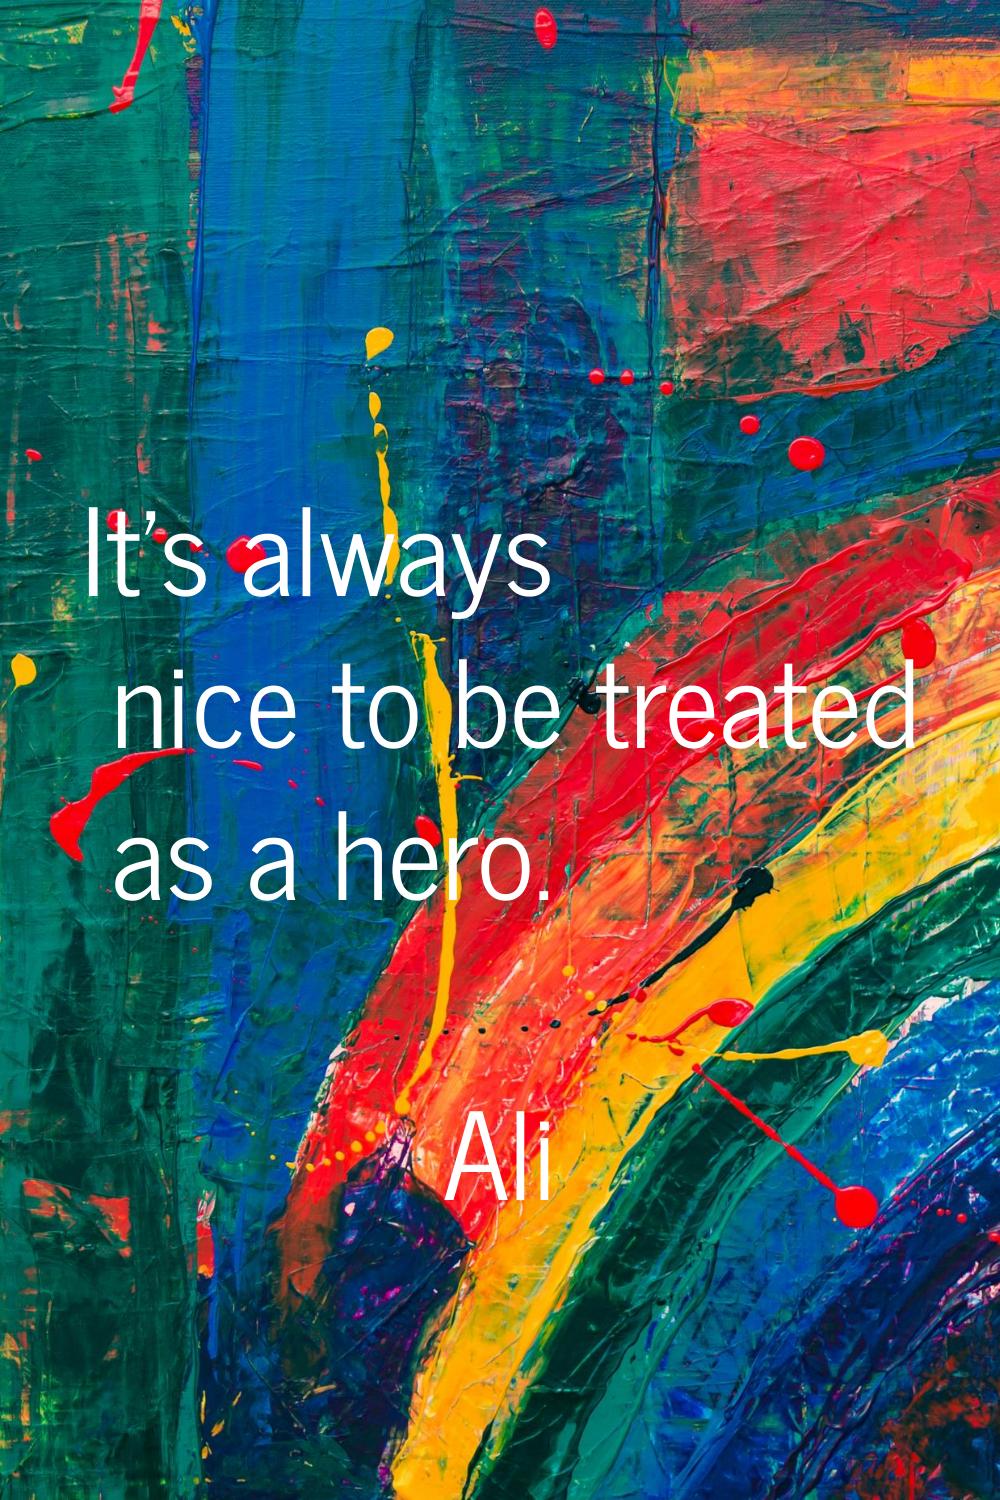 It's always nice to be treated as a hero.